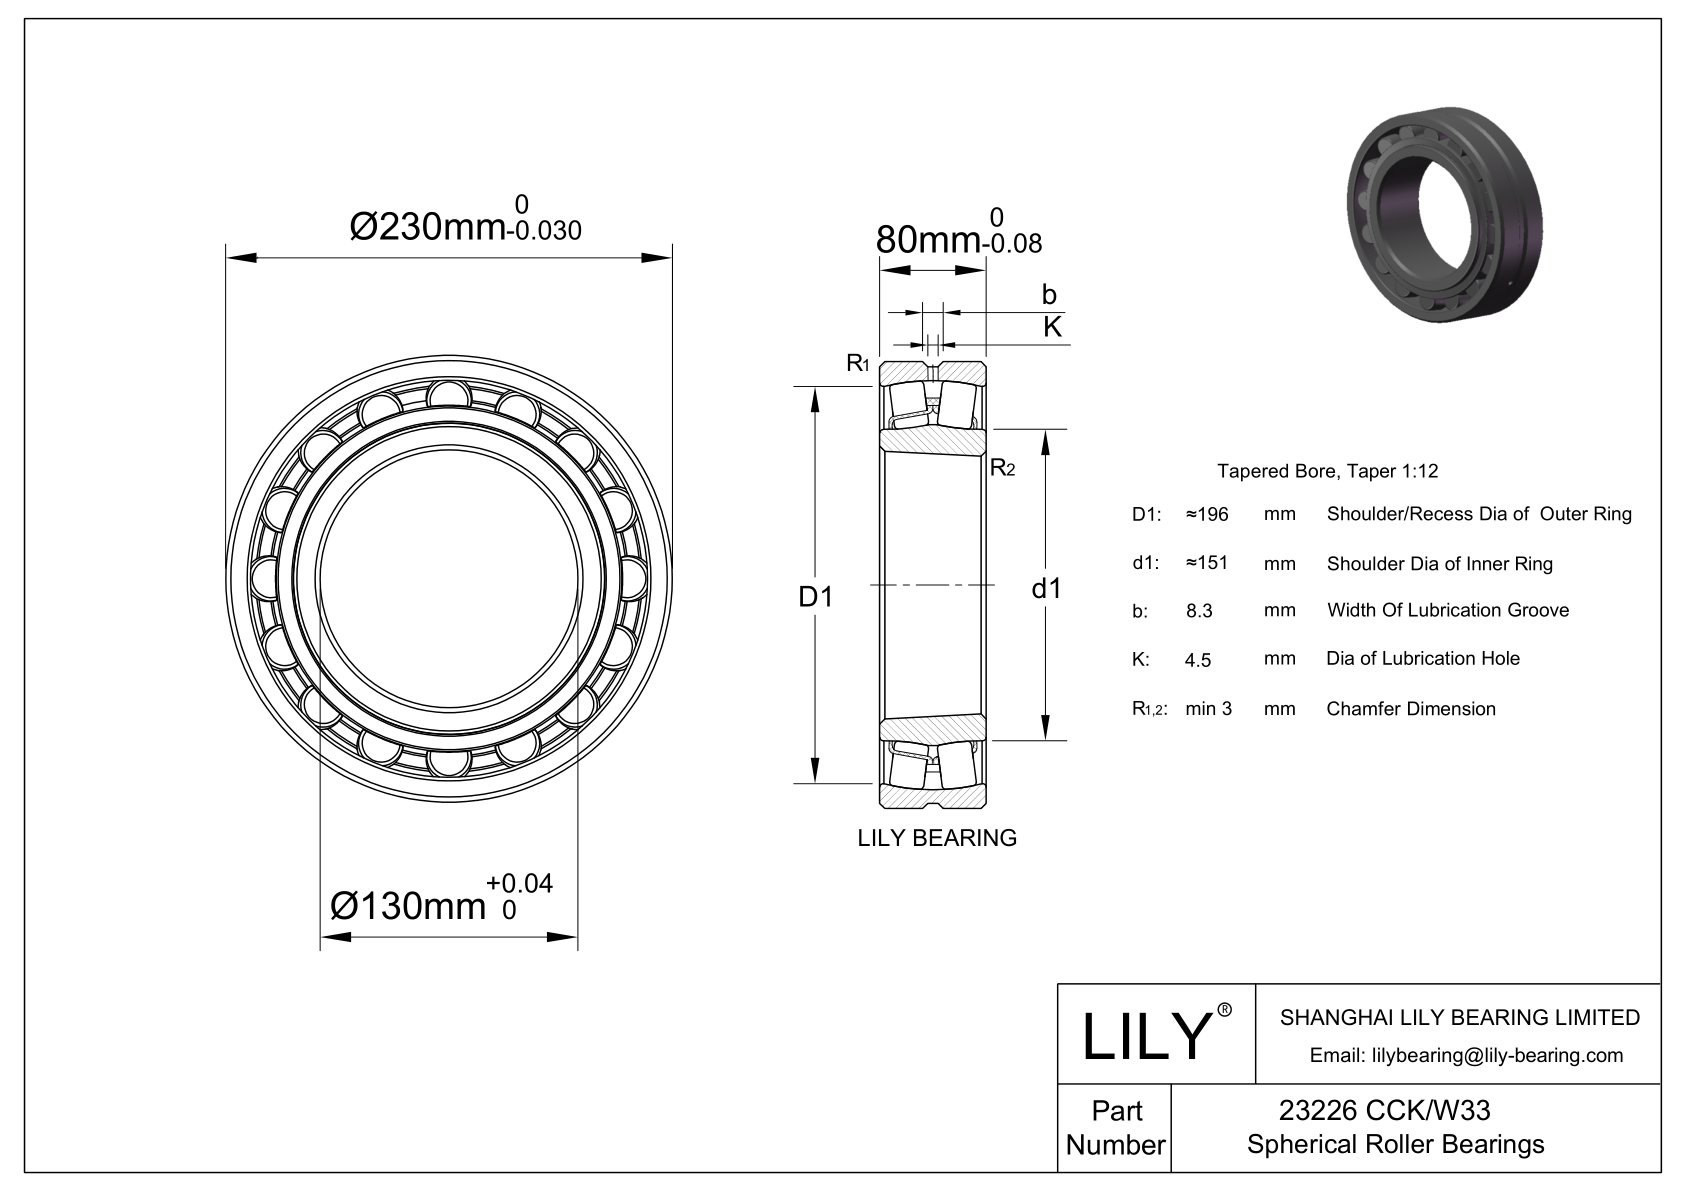 23226 CCK/W33 Double Row Spherical Roller Bearing cad drawing